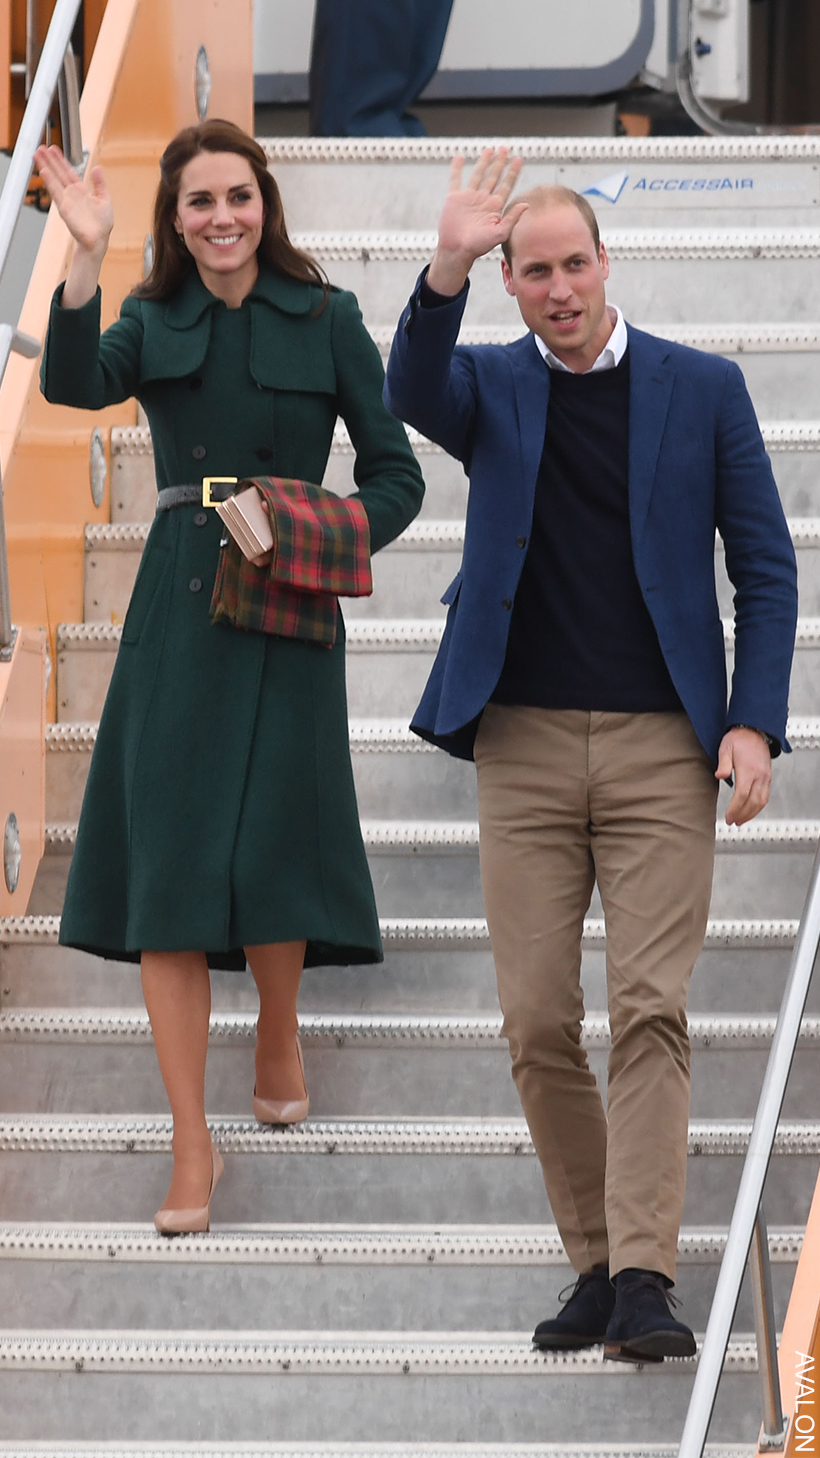 William and Kate disembarking a plane. The Princess is wearing a dark, forest green coat and is holding a green and red tartan scarf. 